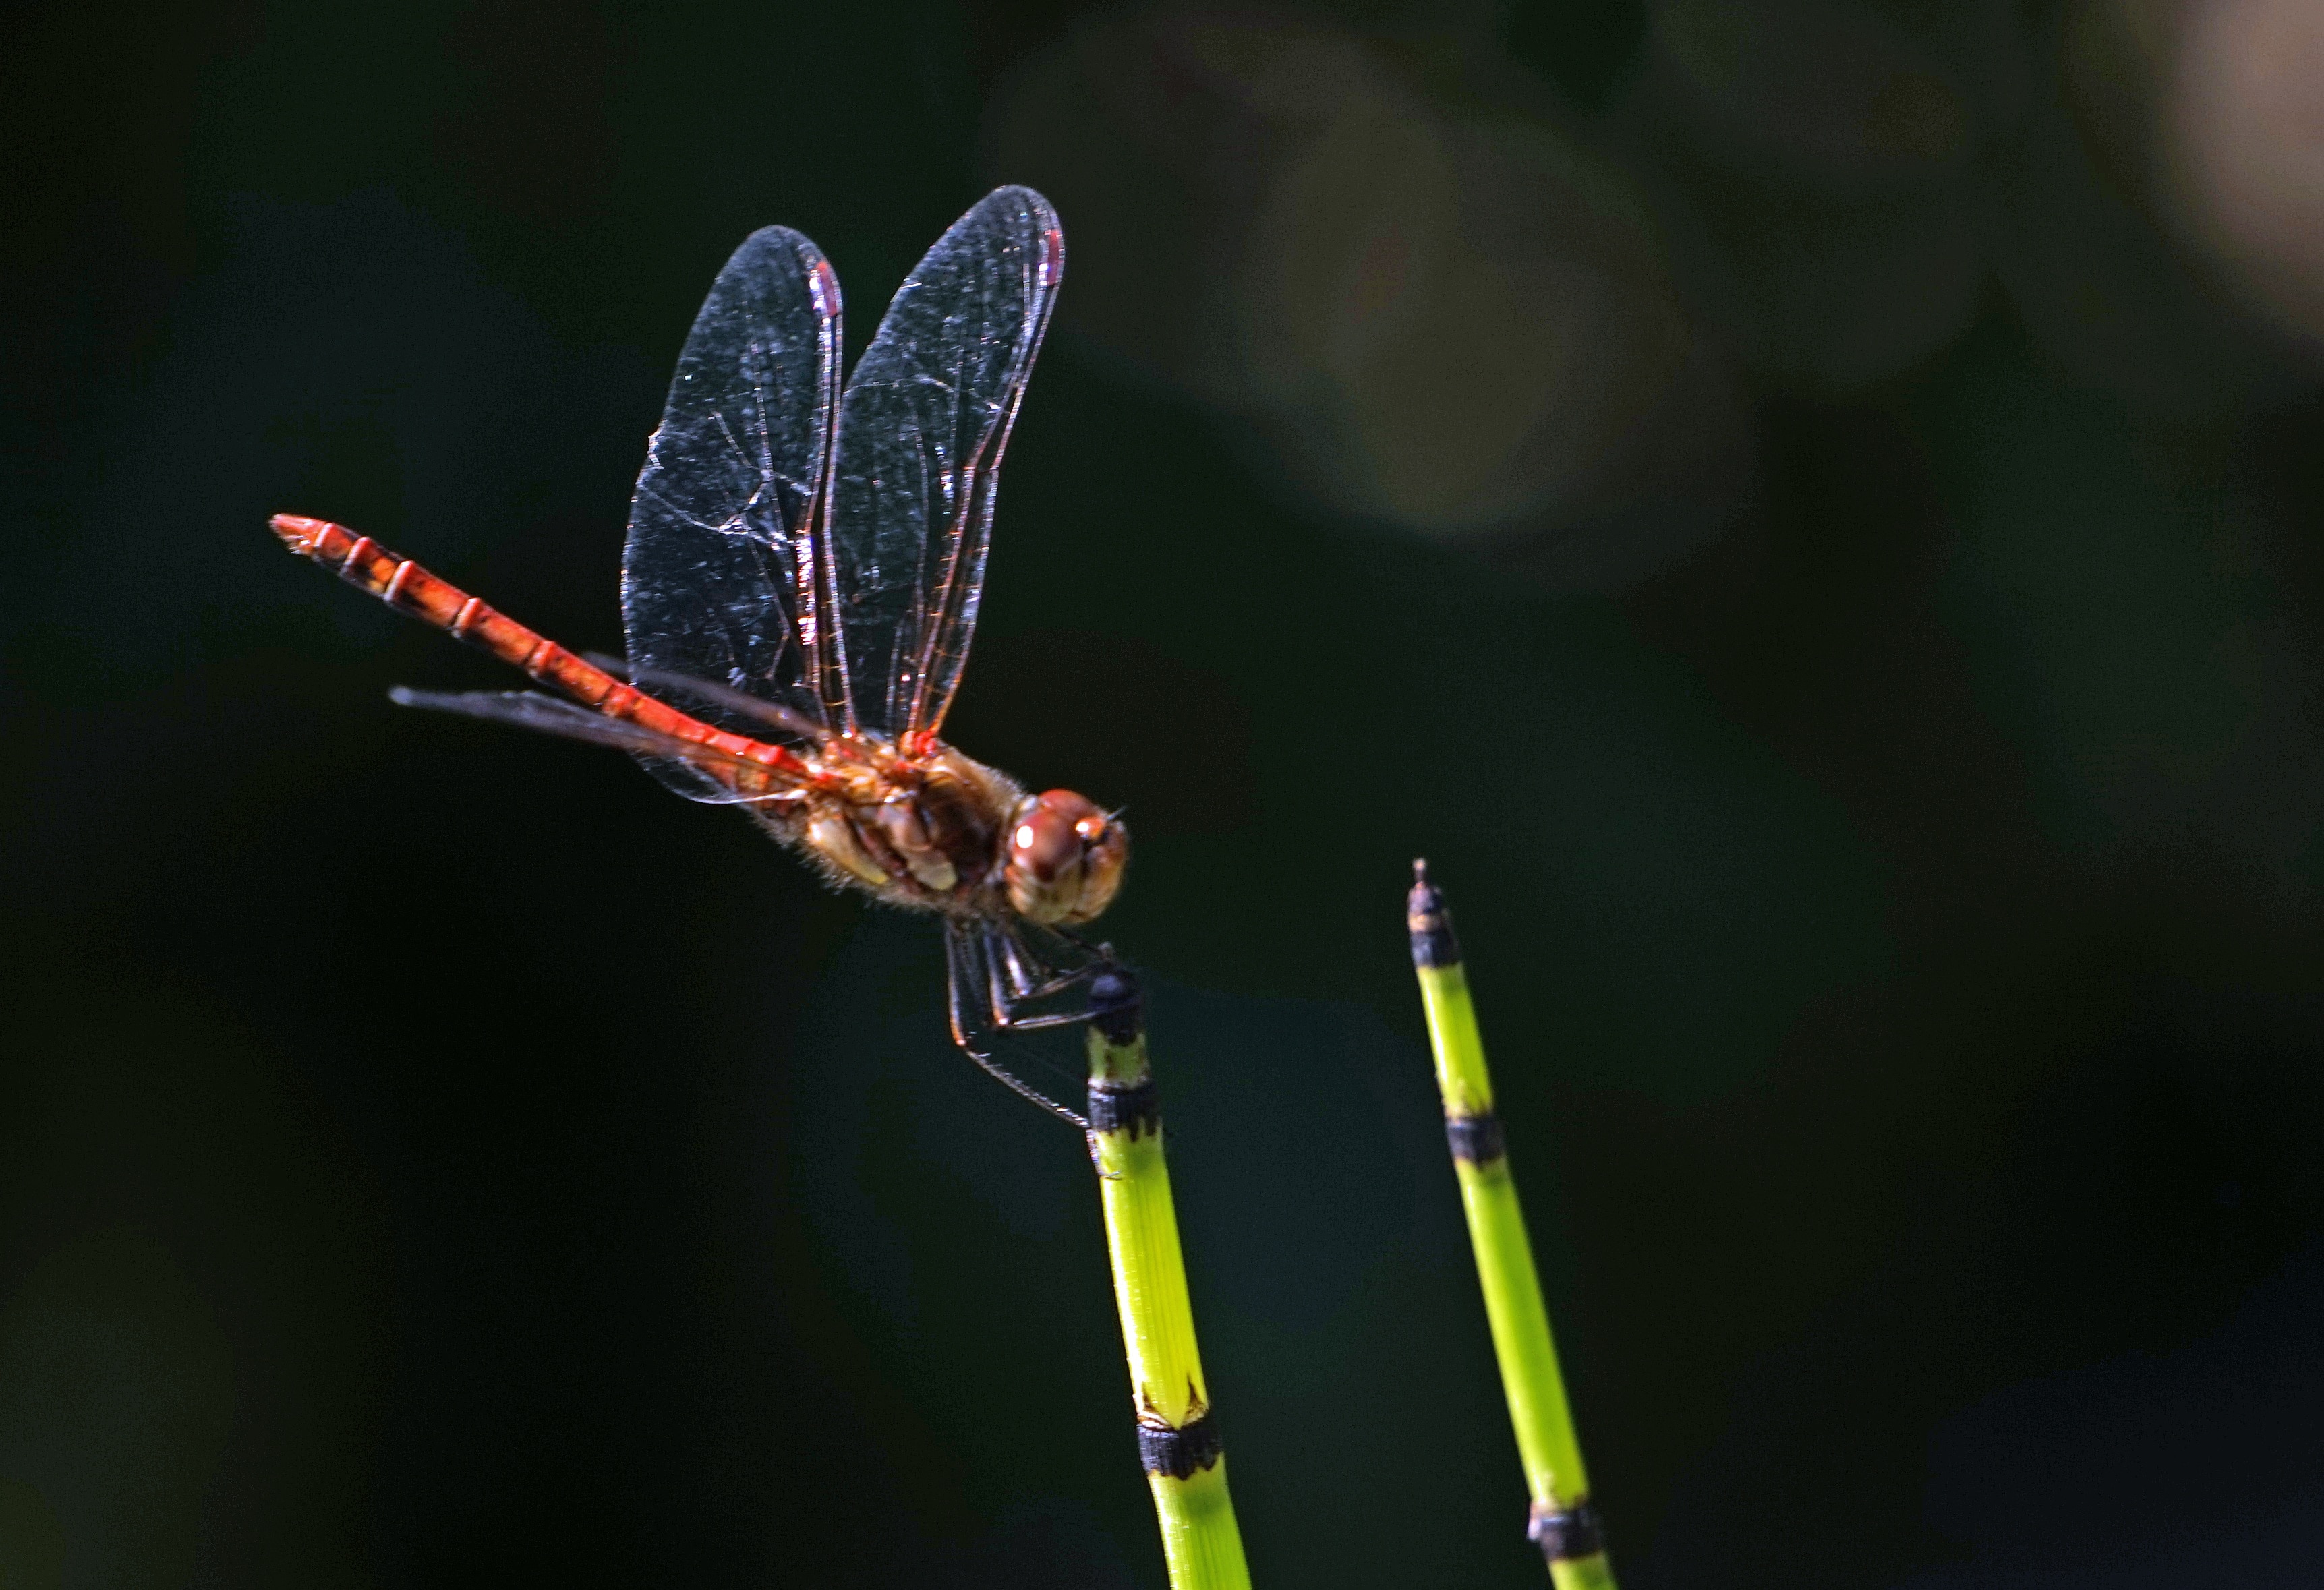 Insect, Halm, Dragonfly, Wing, insect, one animal